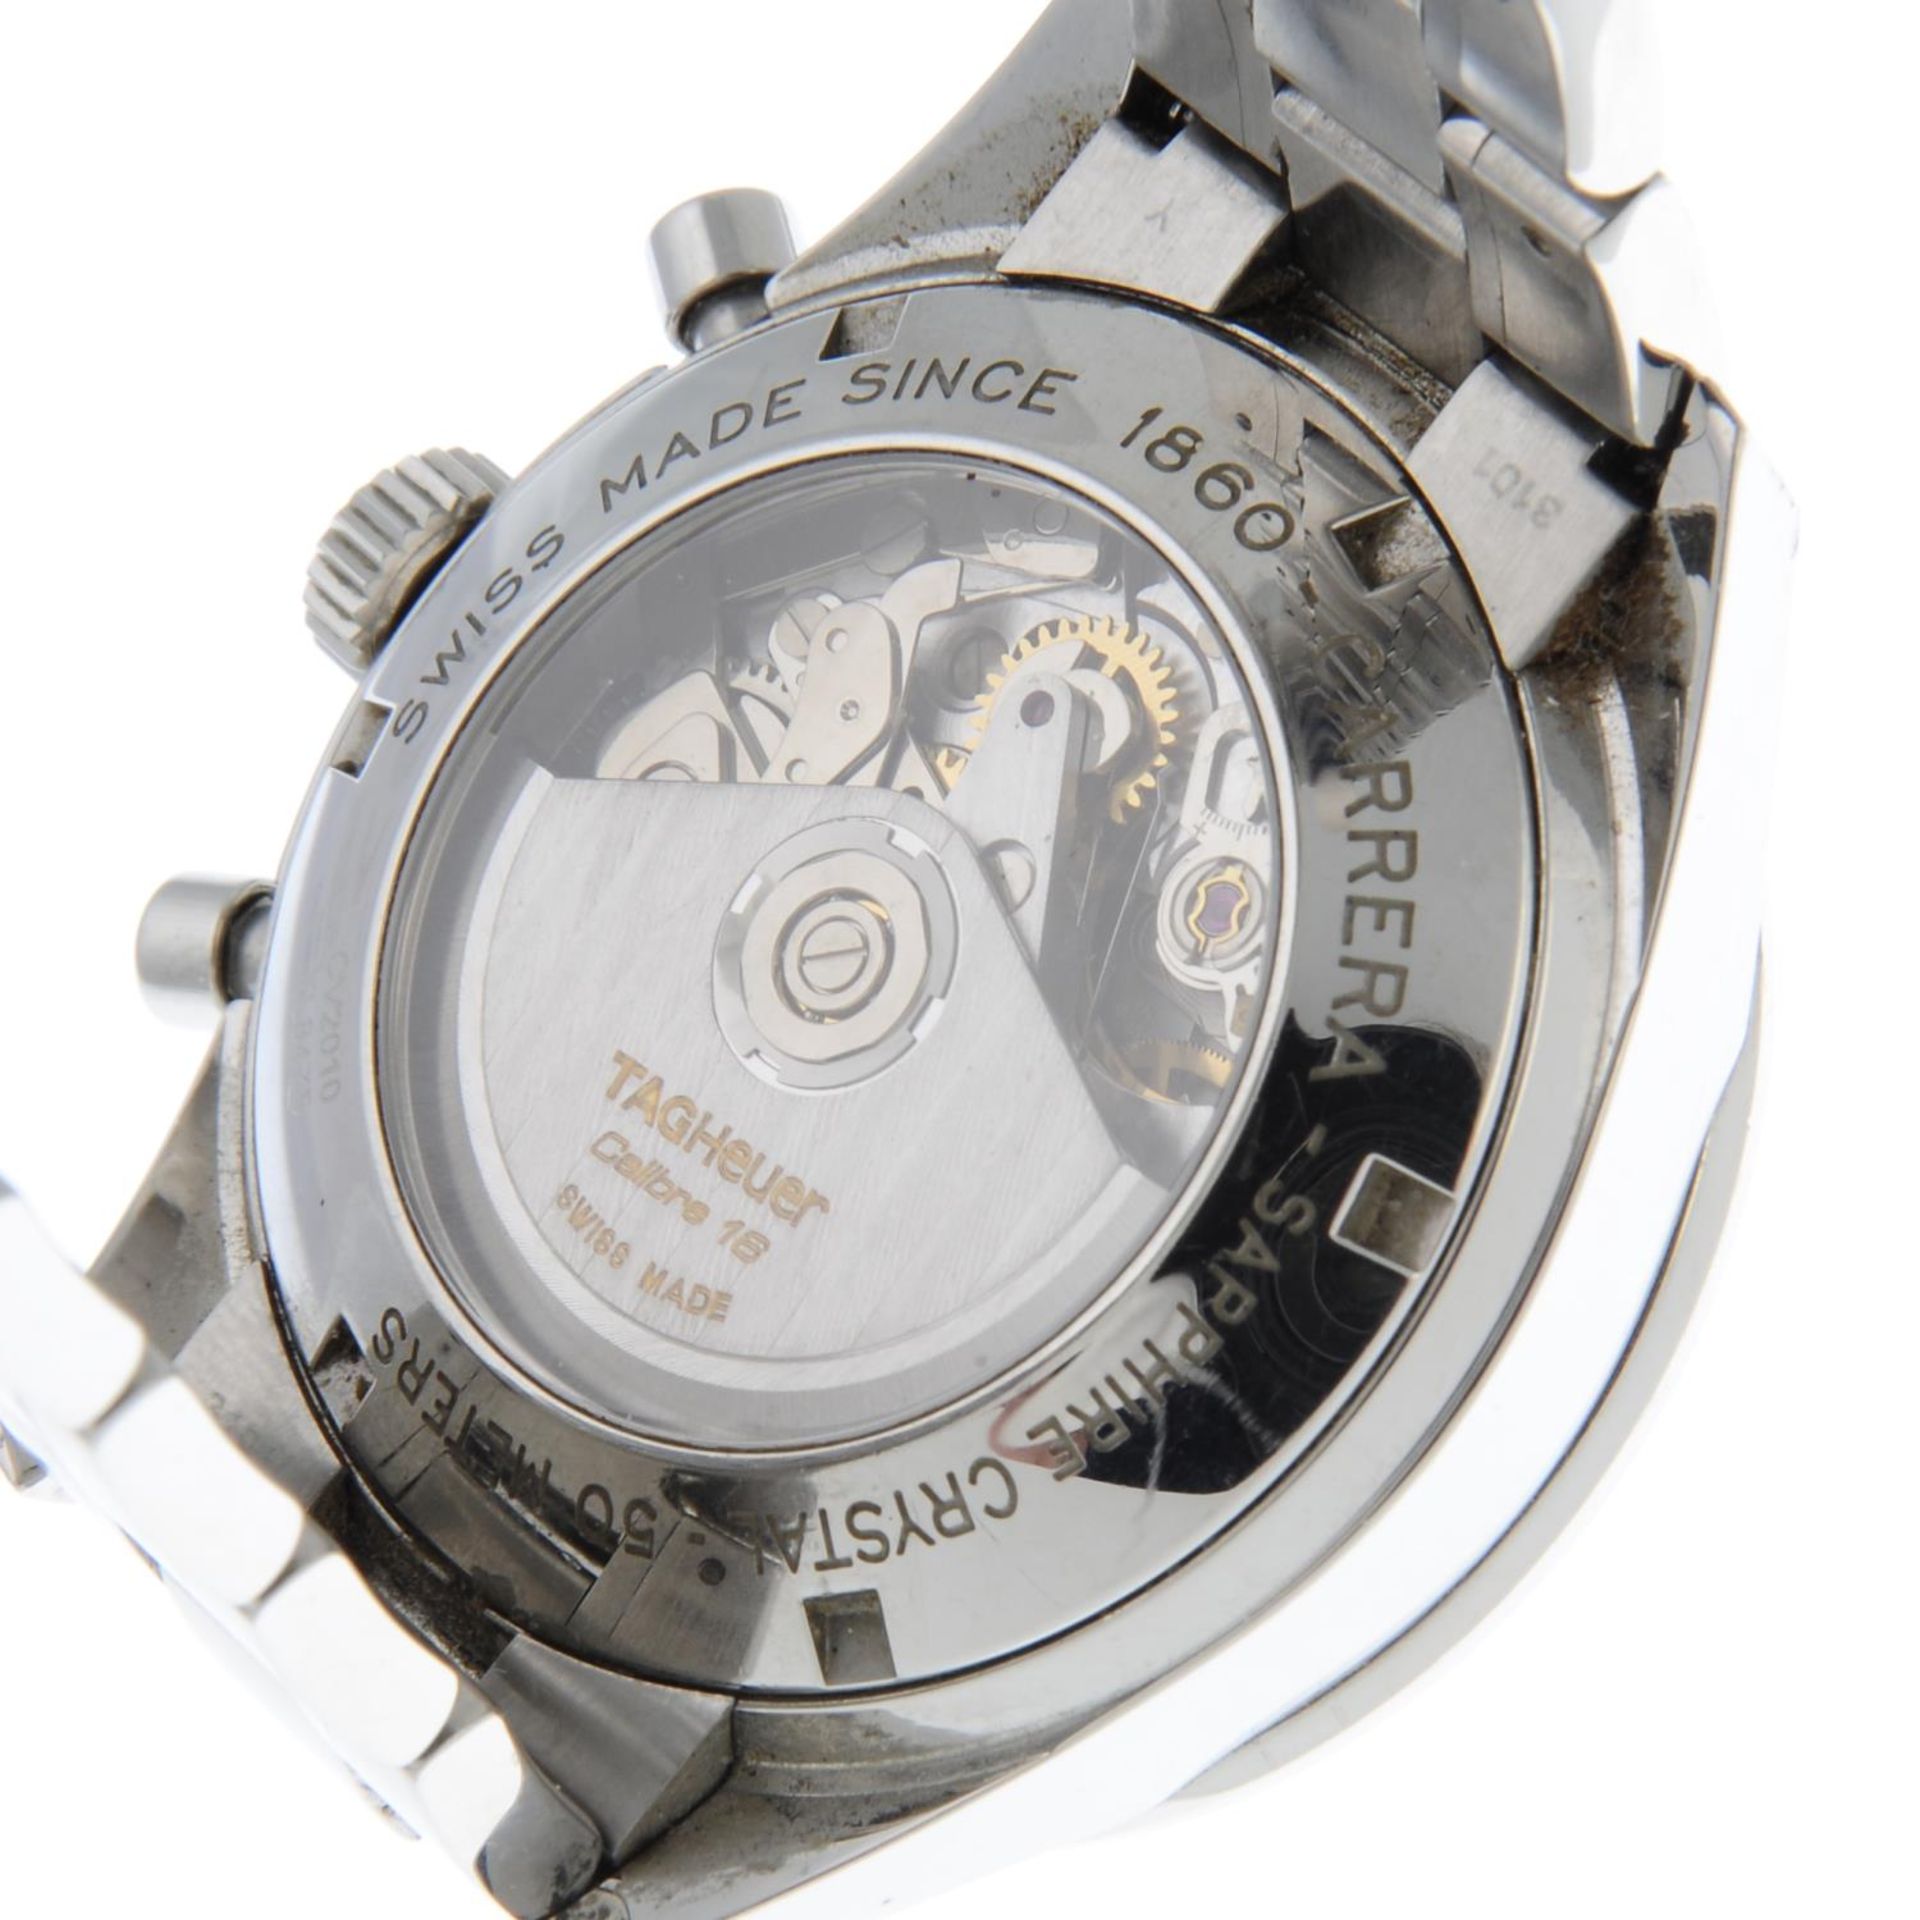 TAG HEUER - a Carrera chronograph bracelet watch. - Image 6 of 6